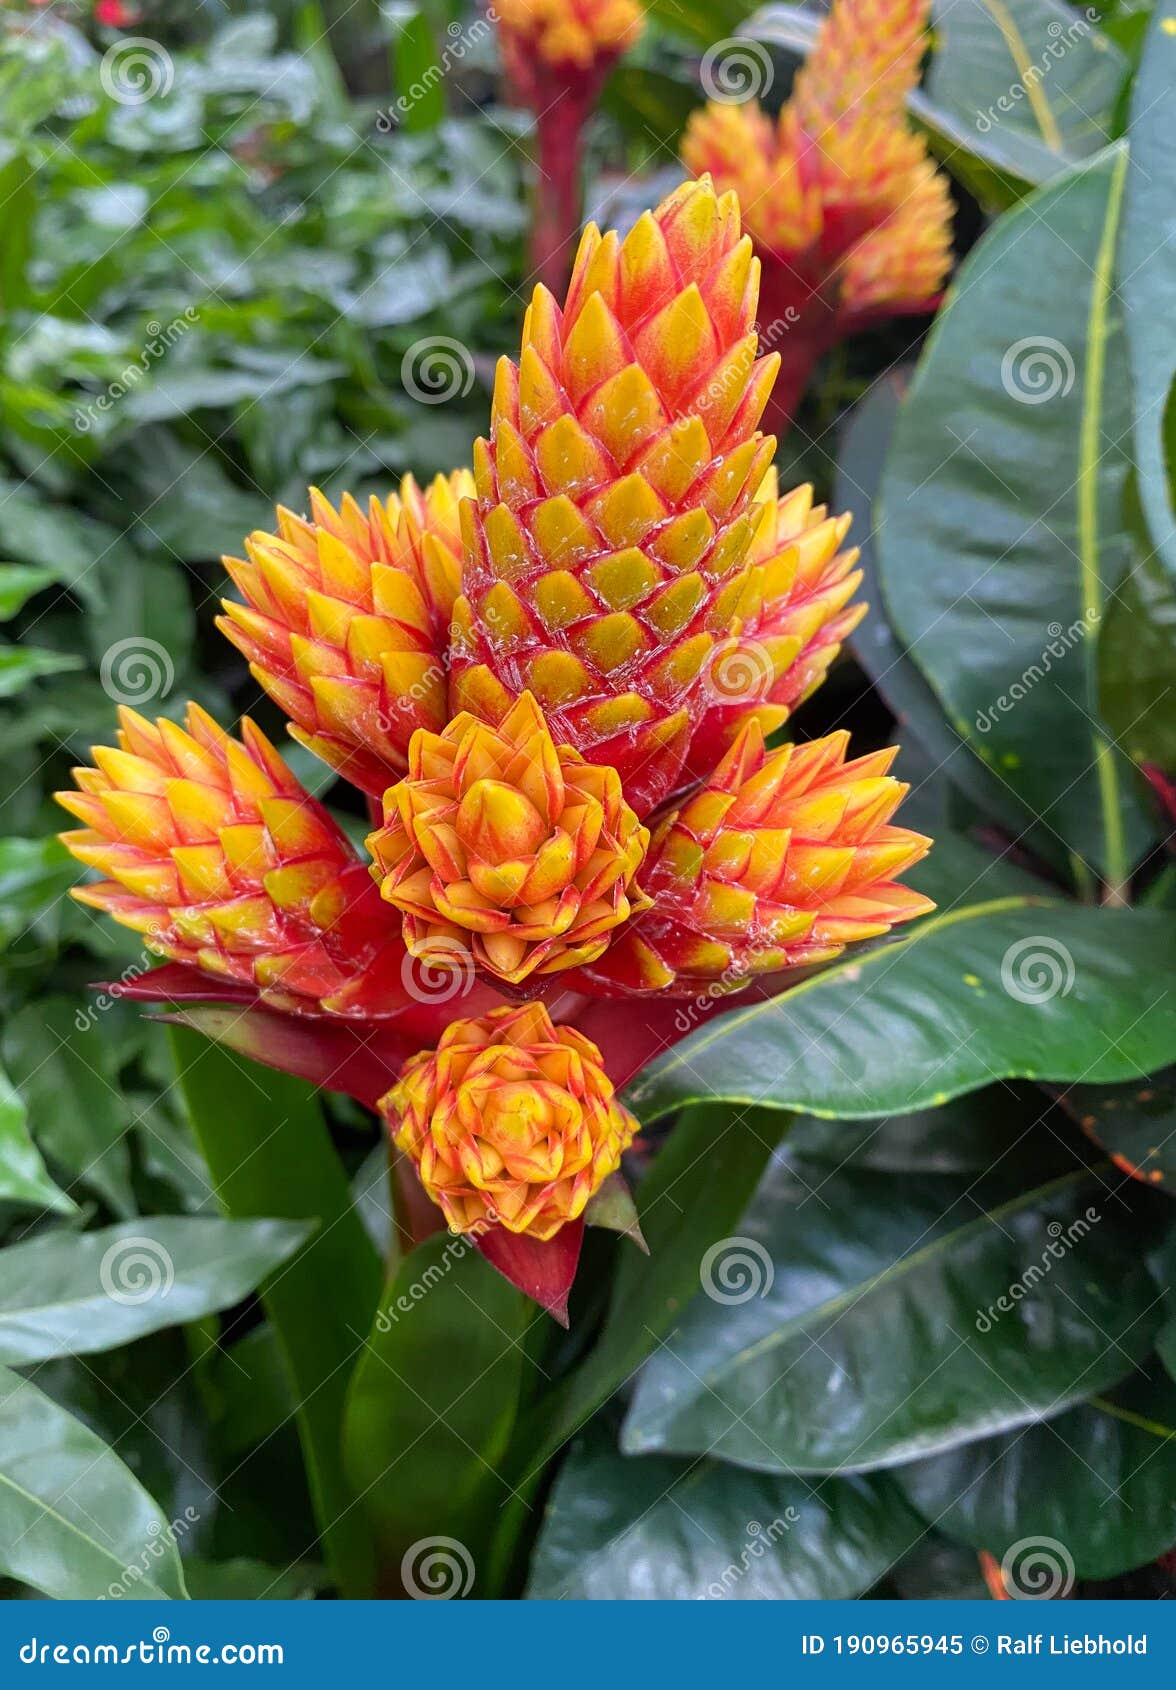 top view on  red  yellow flowers guzmania conifera with green leaves